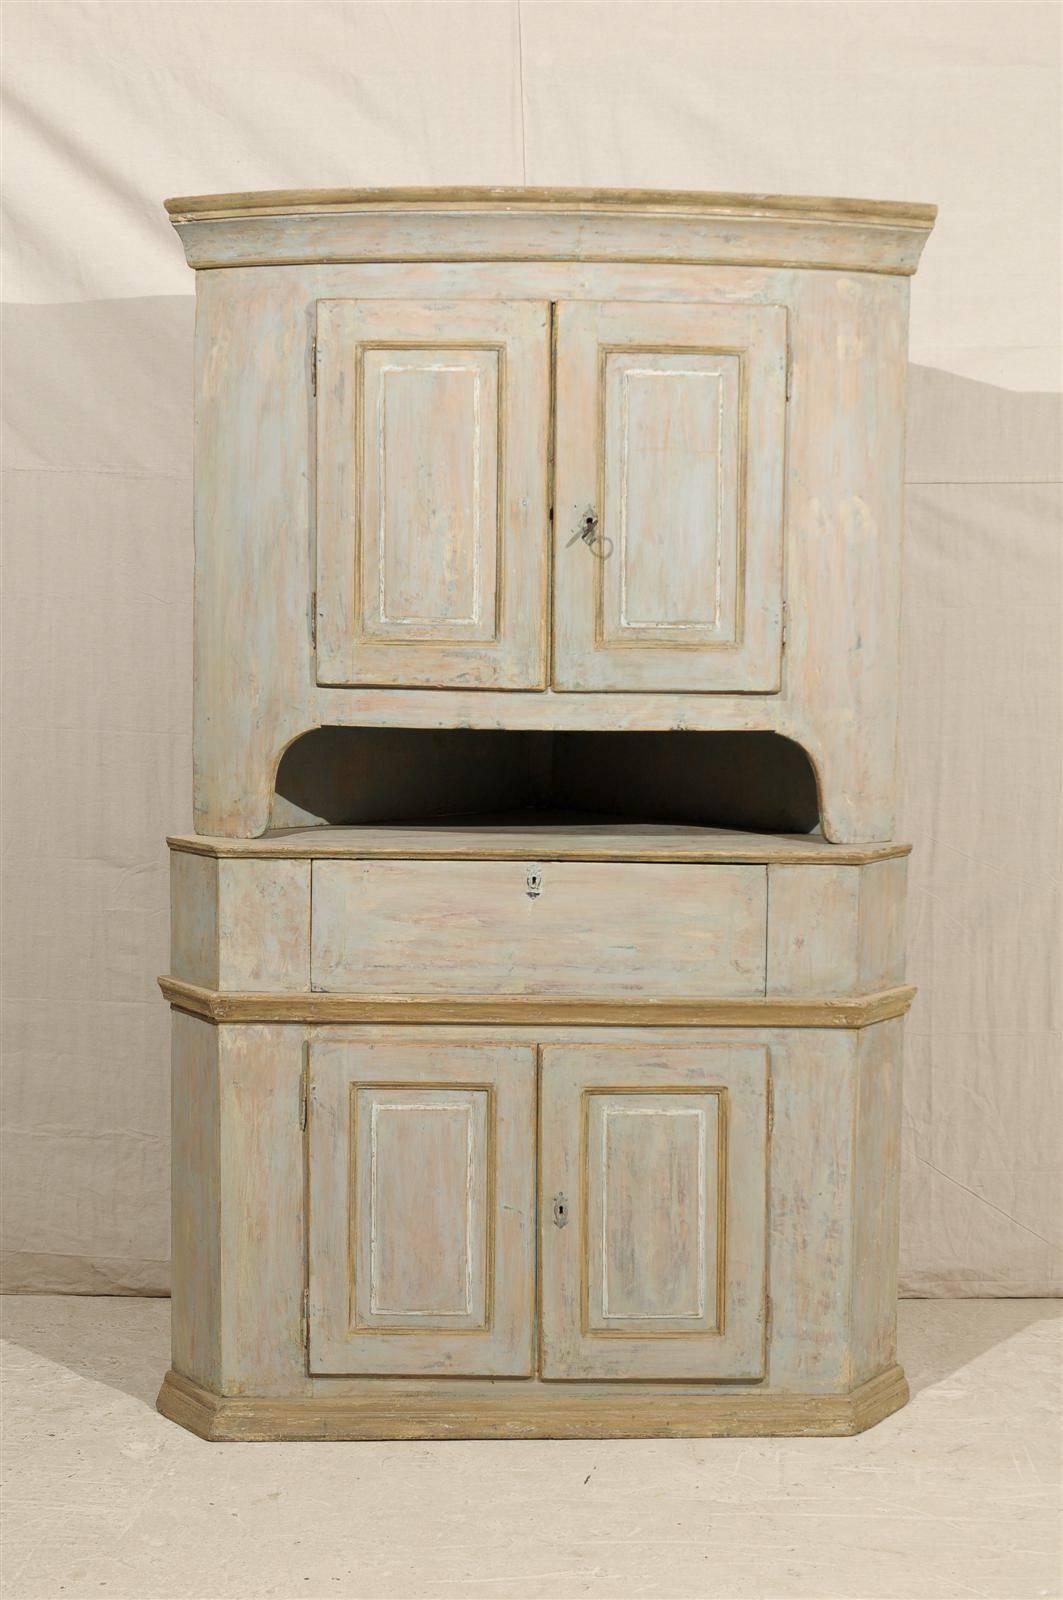 A large Swedish early 19th century Karl Johan corner cabinet made of painted firewood with raised panel doors, convex upper body, multiple inner shelves opening in the center and angled sides. The Karl Johan is the period that follows the Gustavian